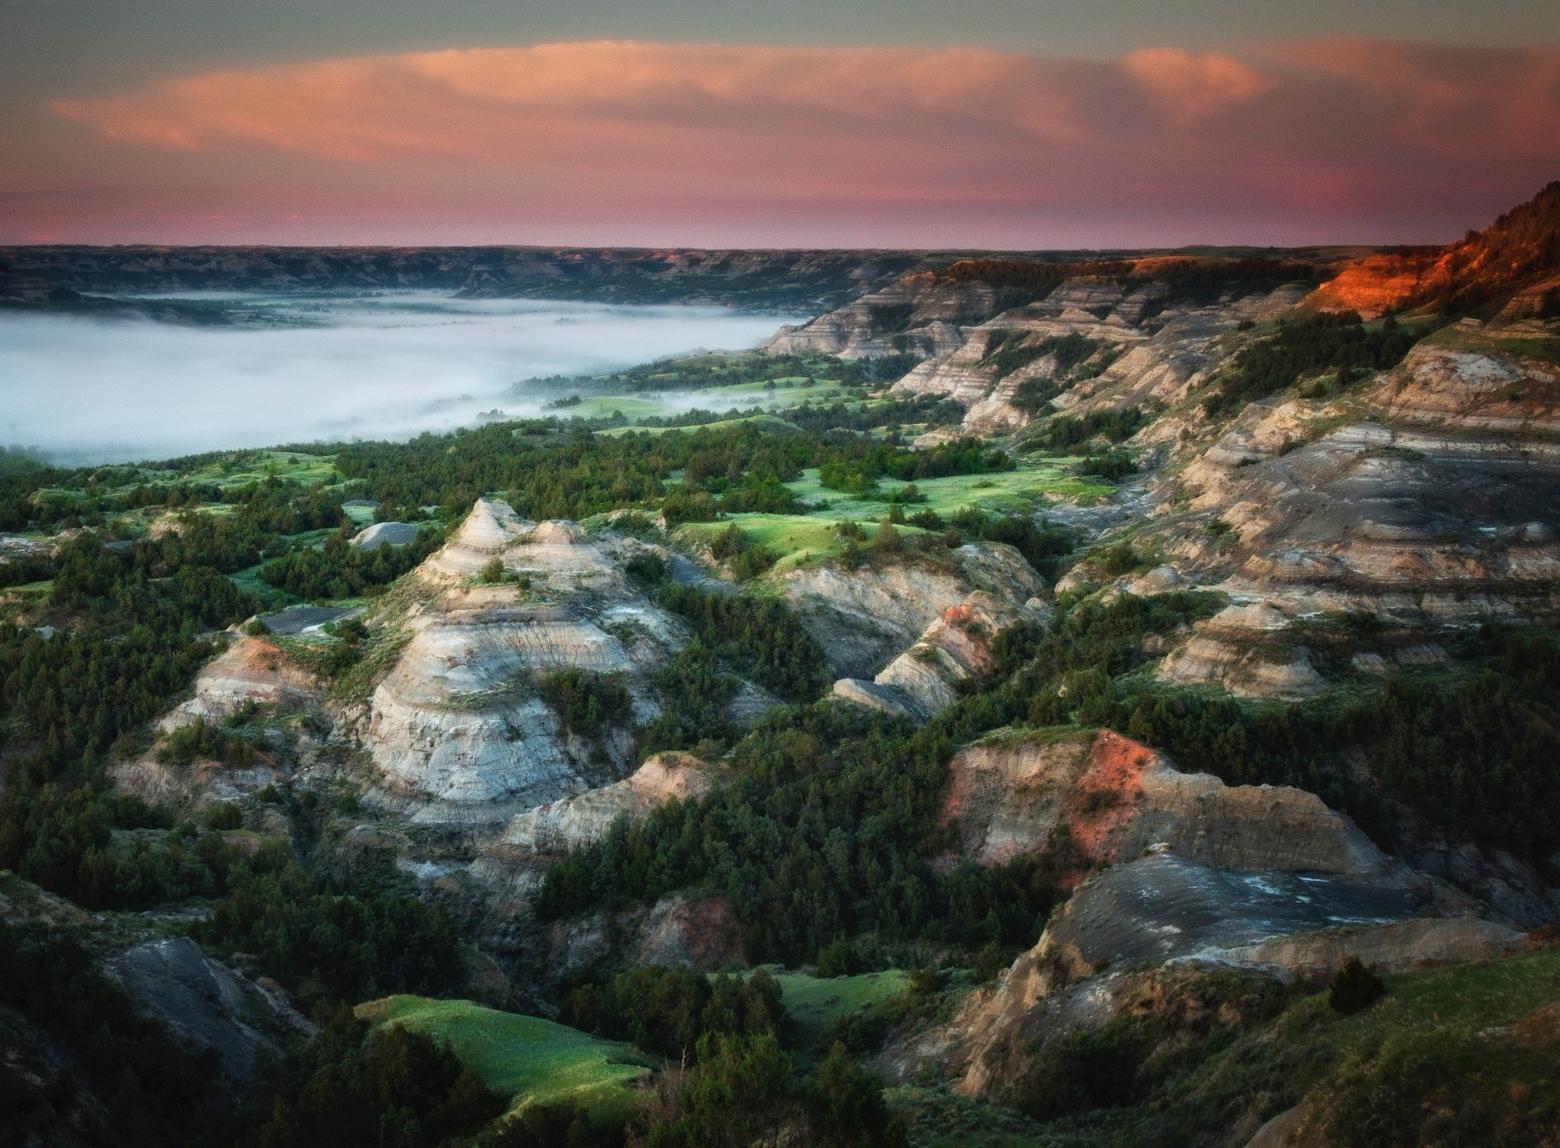 With its rugged breaks carved into prairie grasslands, North Dakota is a state that left Theodore Roosevelt smitten after he suffered personal heartbreak.  Here is a photo of the national Park that bears his name. Photo courtesy Kathy Turner/National Park Service